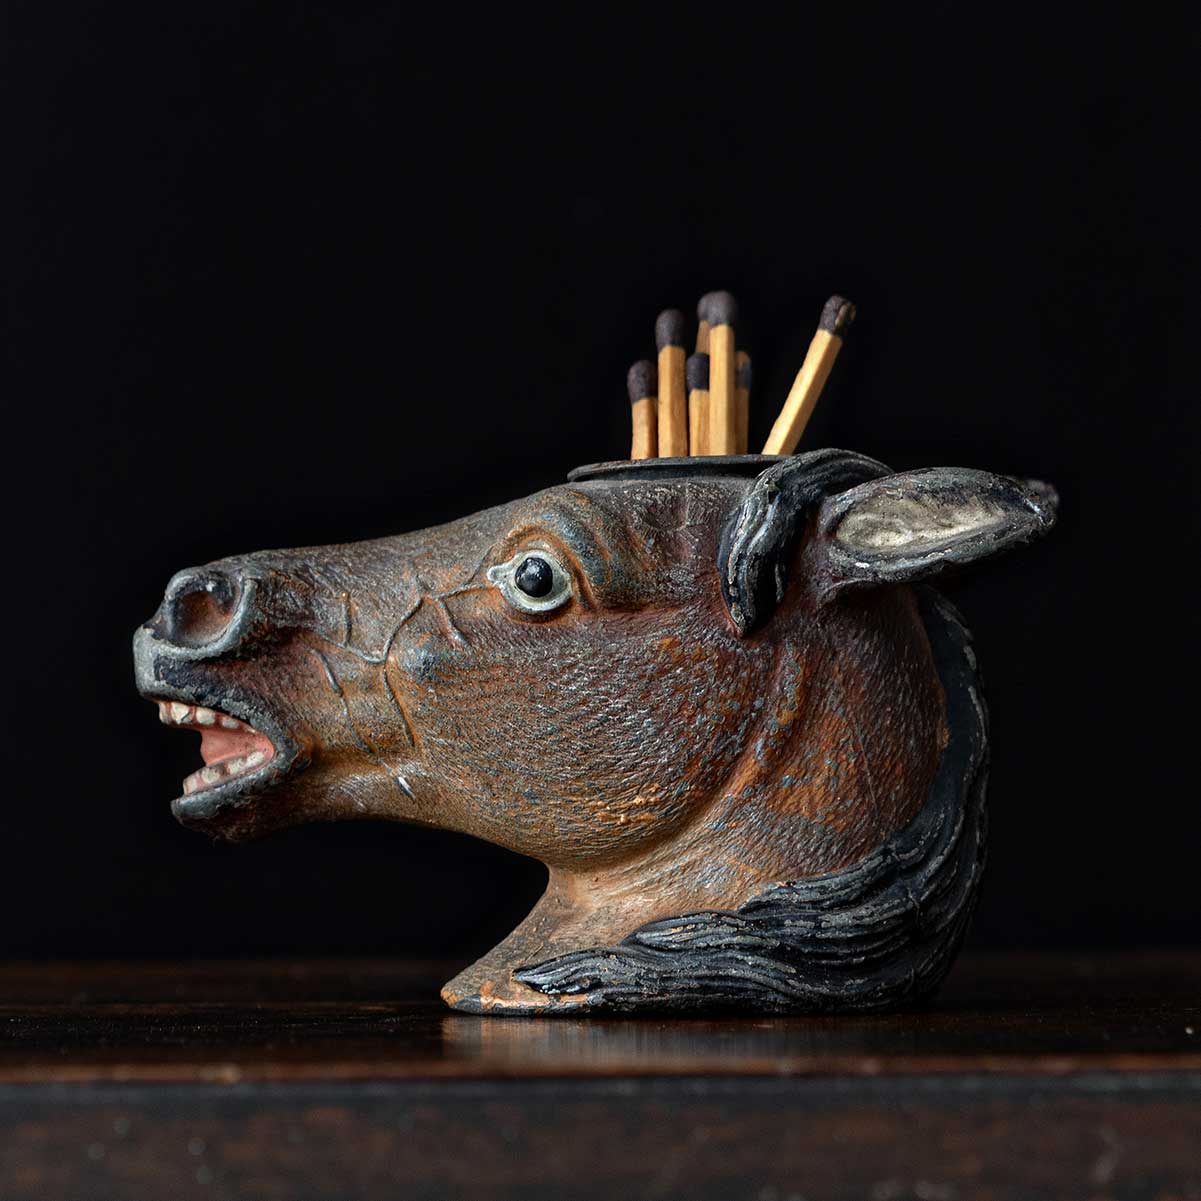 Cold Painted Spelter Match Holder in the Form of a Horses Head Circa. 1890